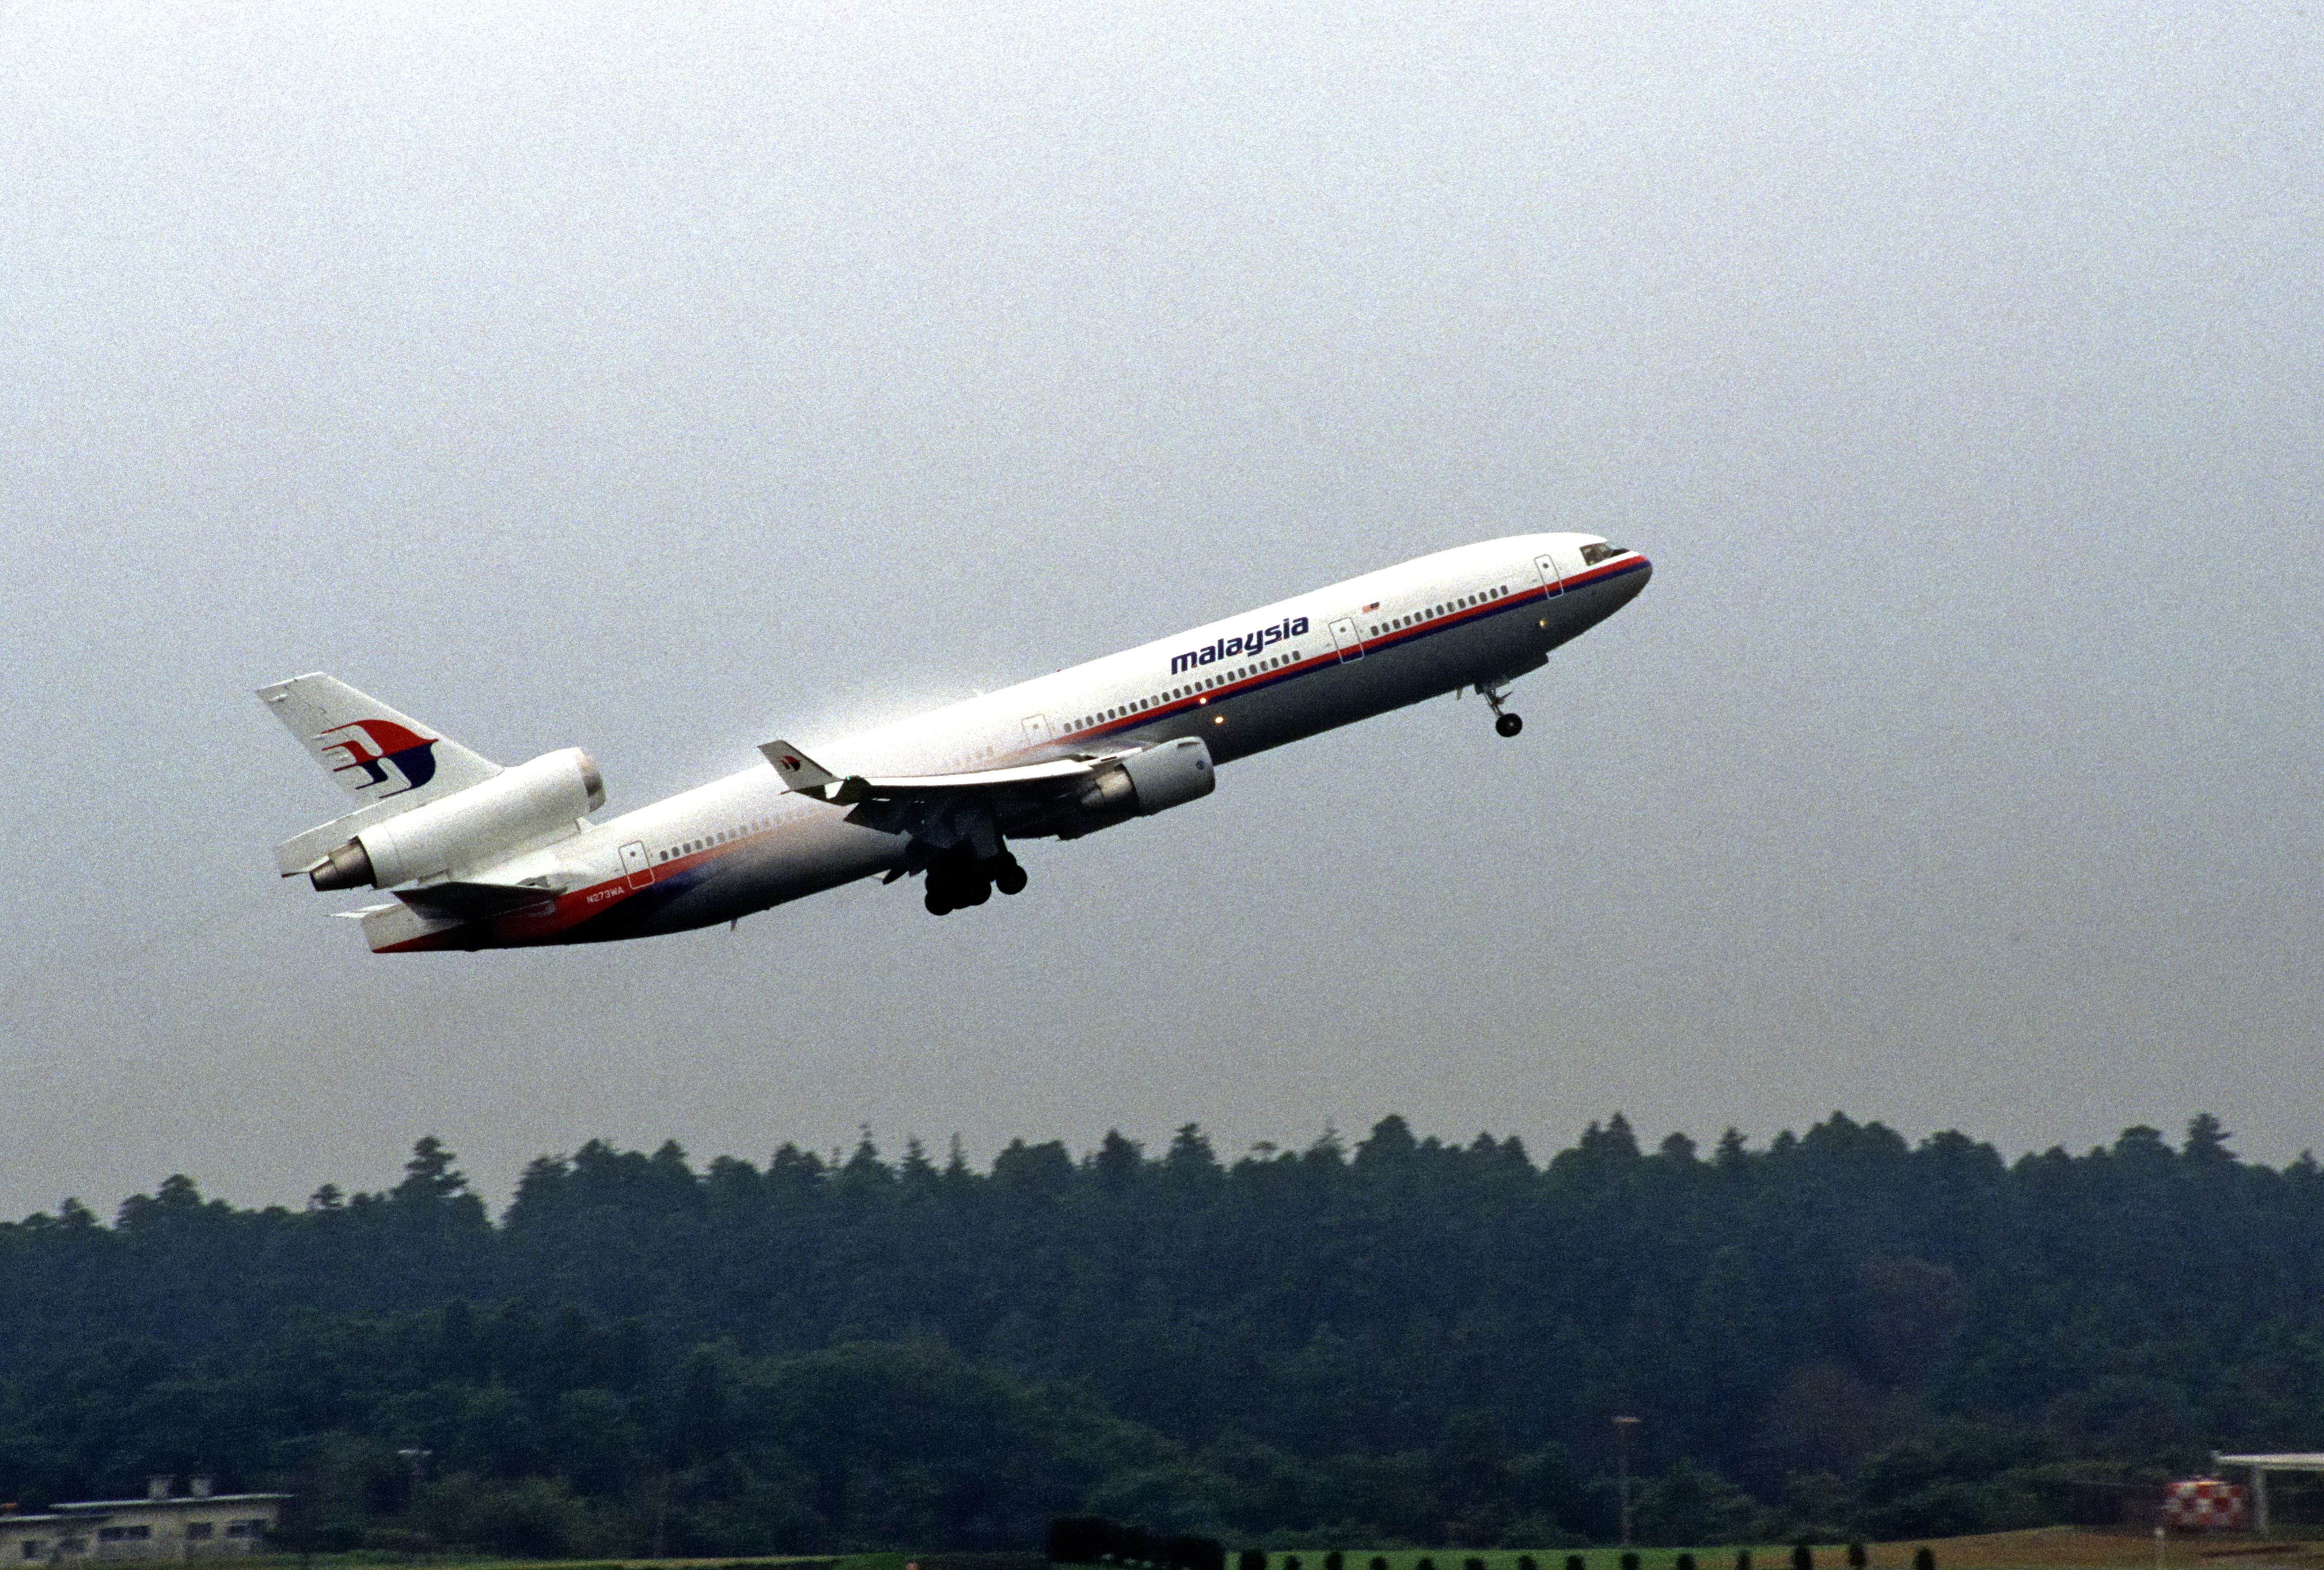 A Malaysia Airlines MD-11 just after takeoff.